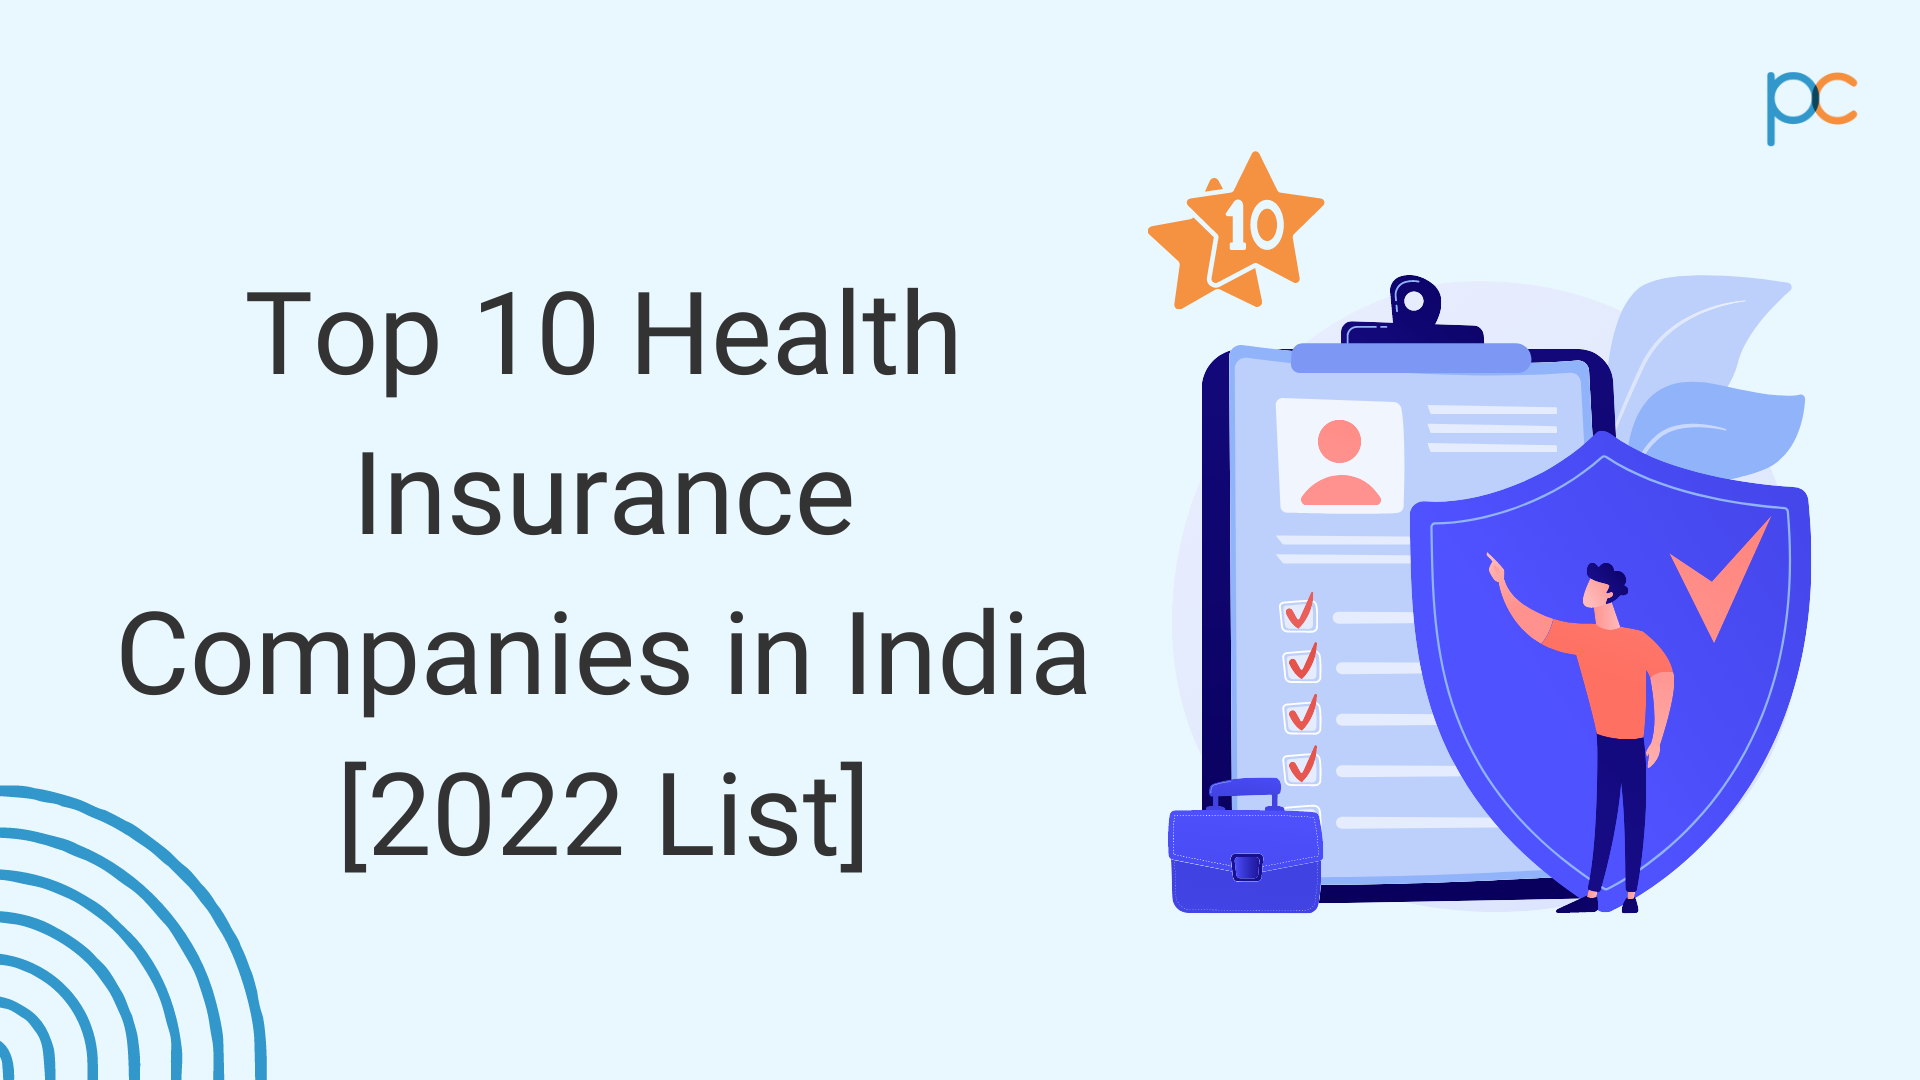 Top 10 Health Insurance Companies In India 2022 List 1